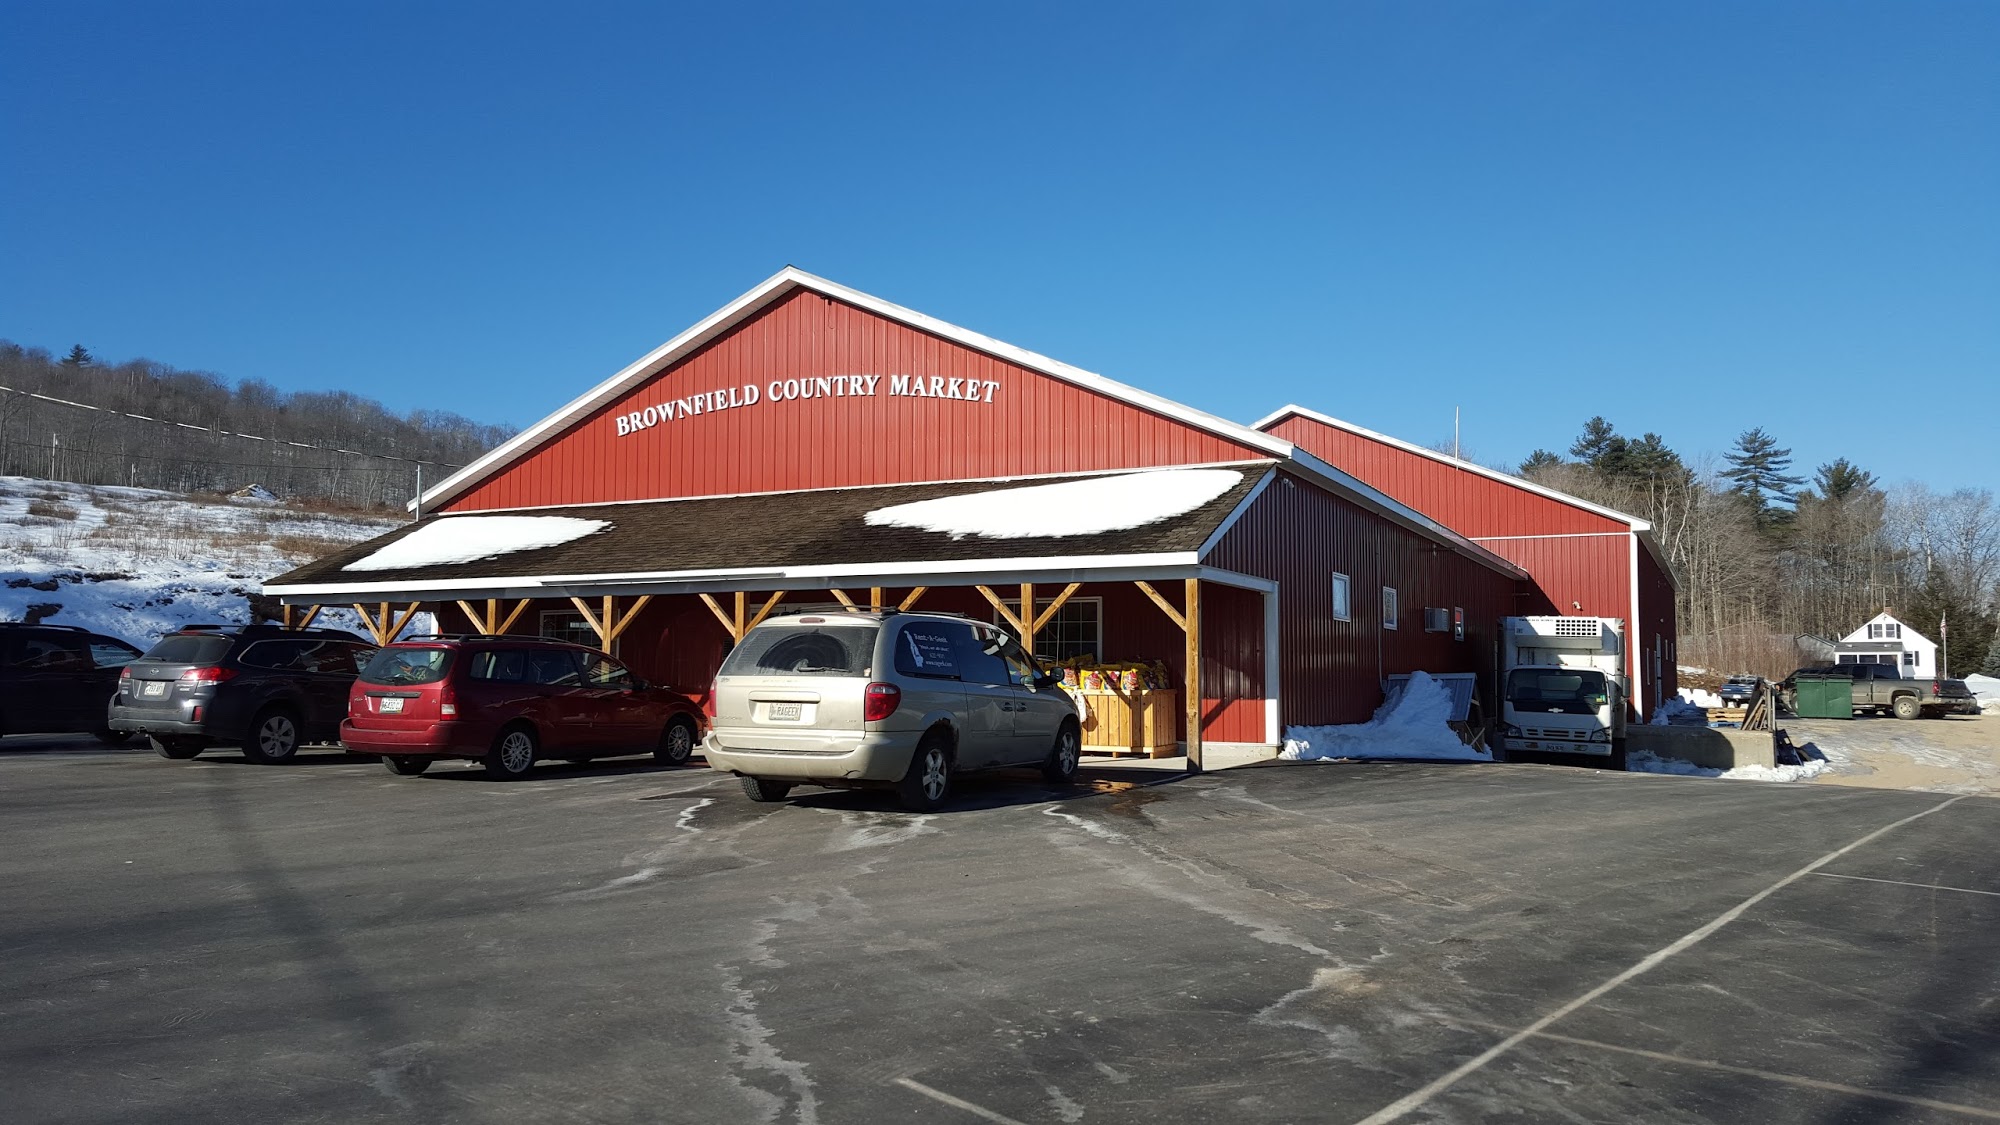 Brownfield Country Market